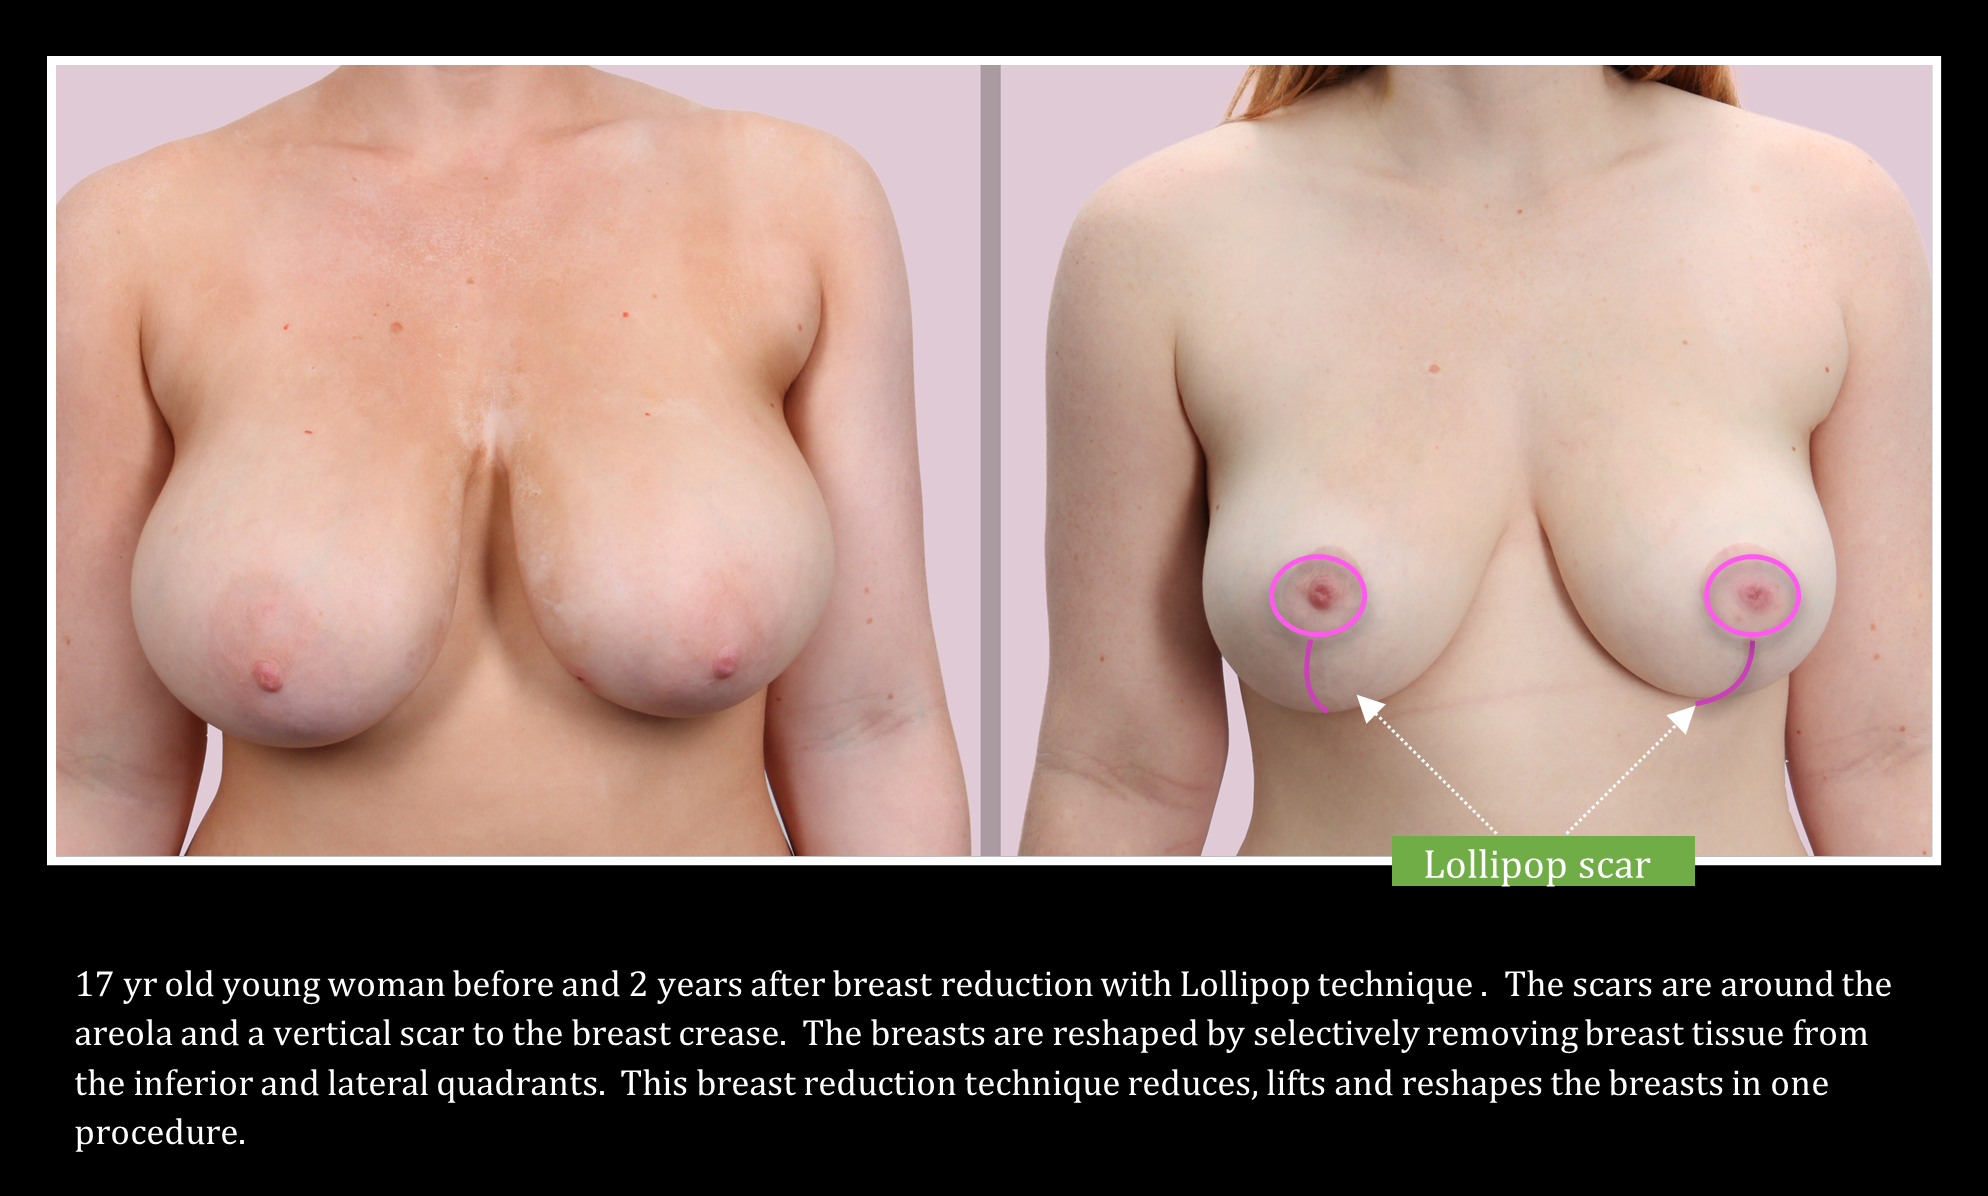 Banner explaining and showing lollipop scar after breast reduction